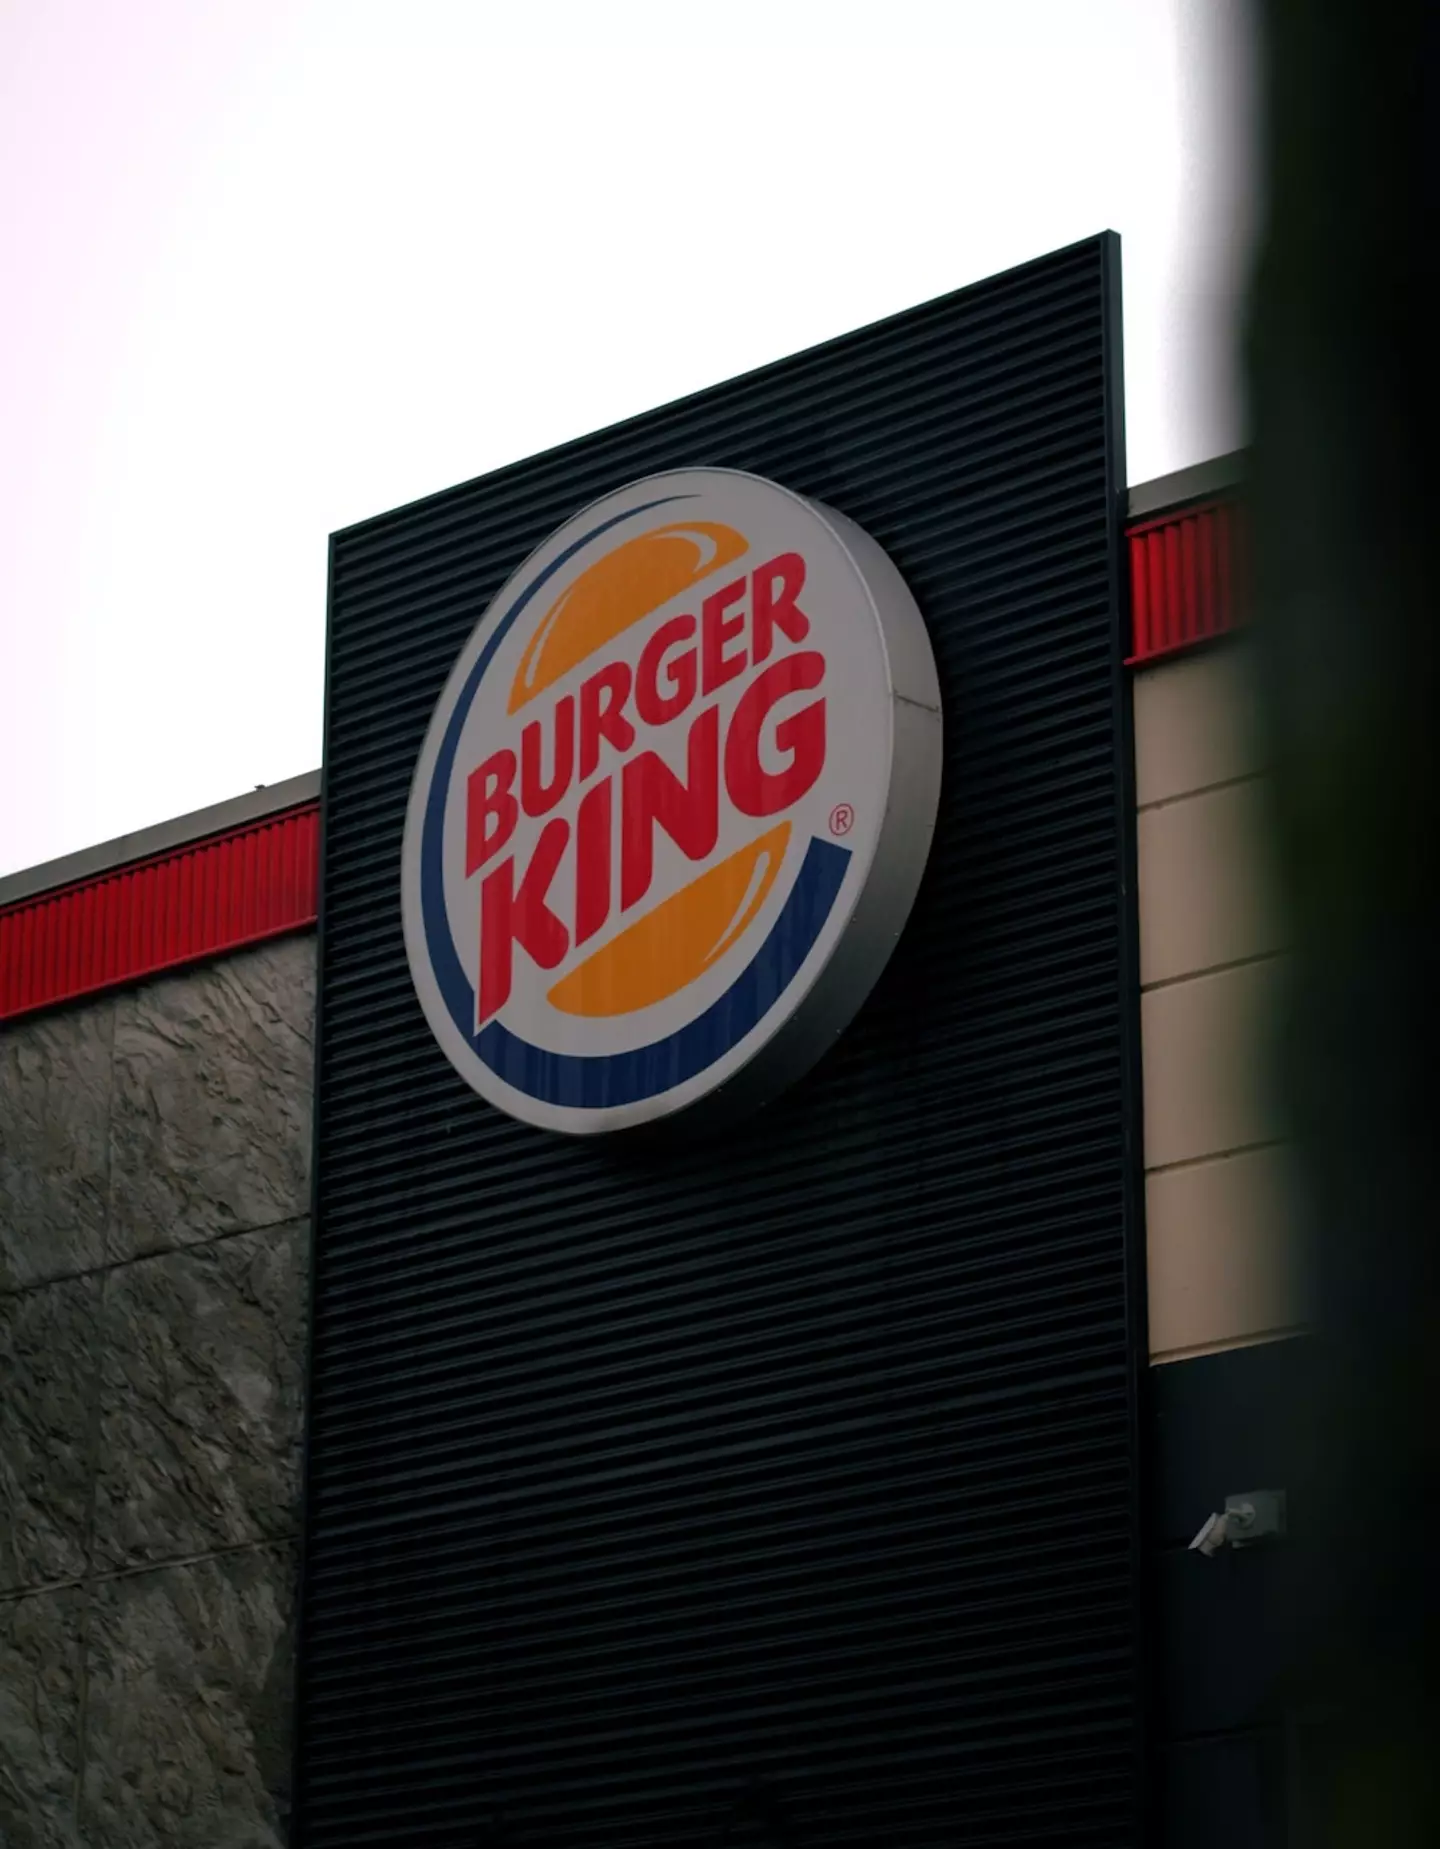 Burger King is yet to respond to the unusual predicament.